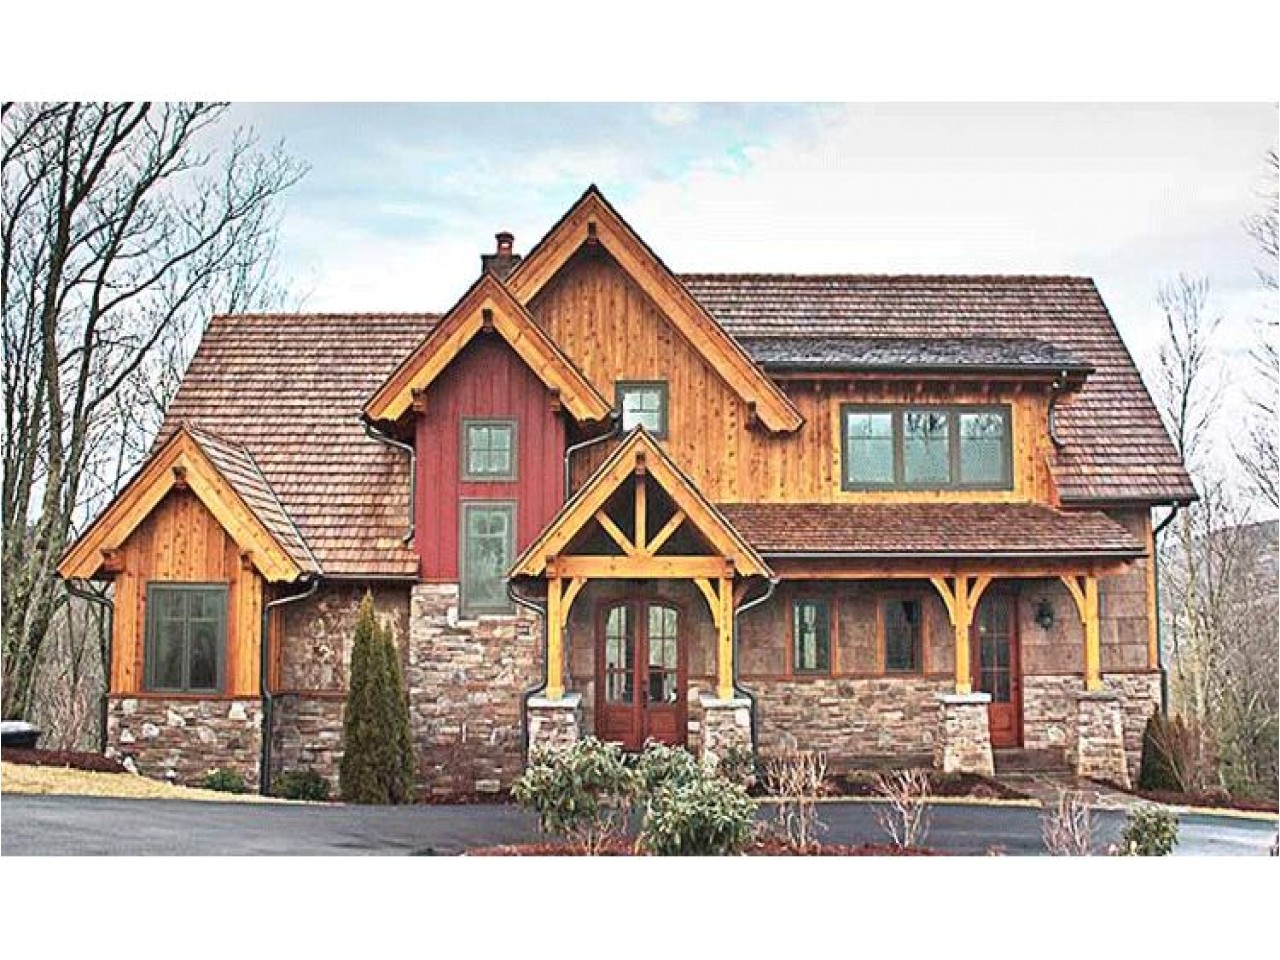 49b45c44cfdb314a rustic mountain home designs rustic mountain house floor plans